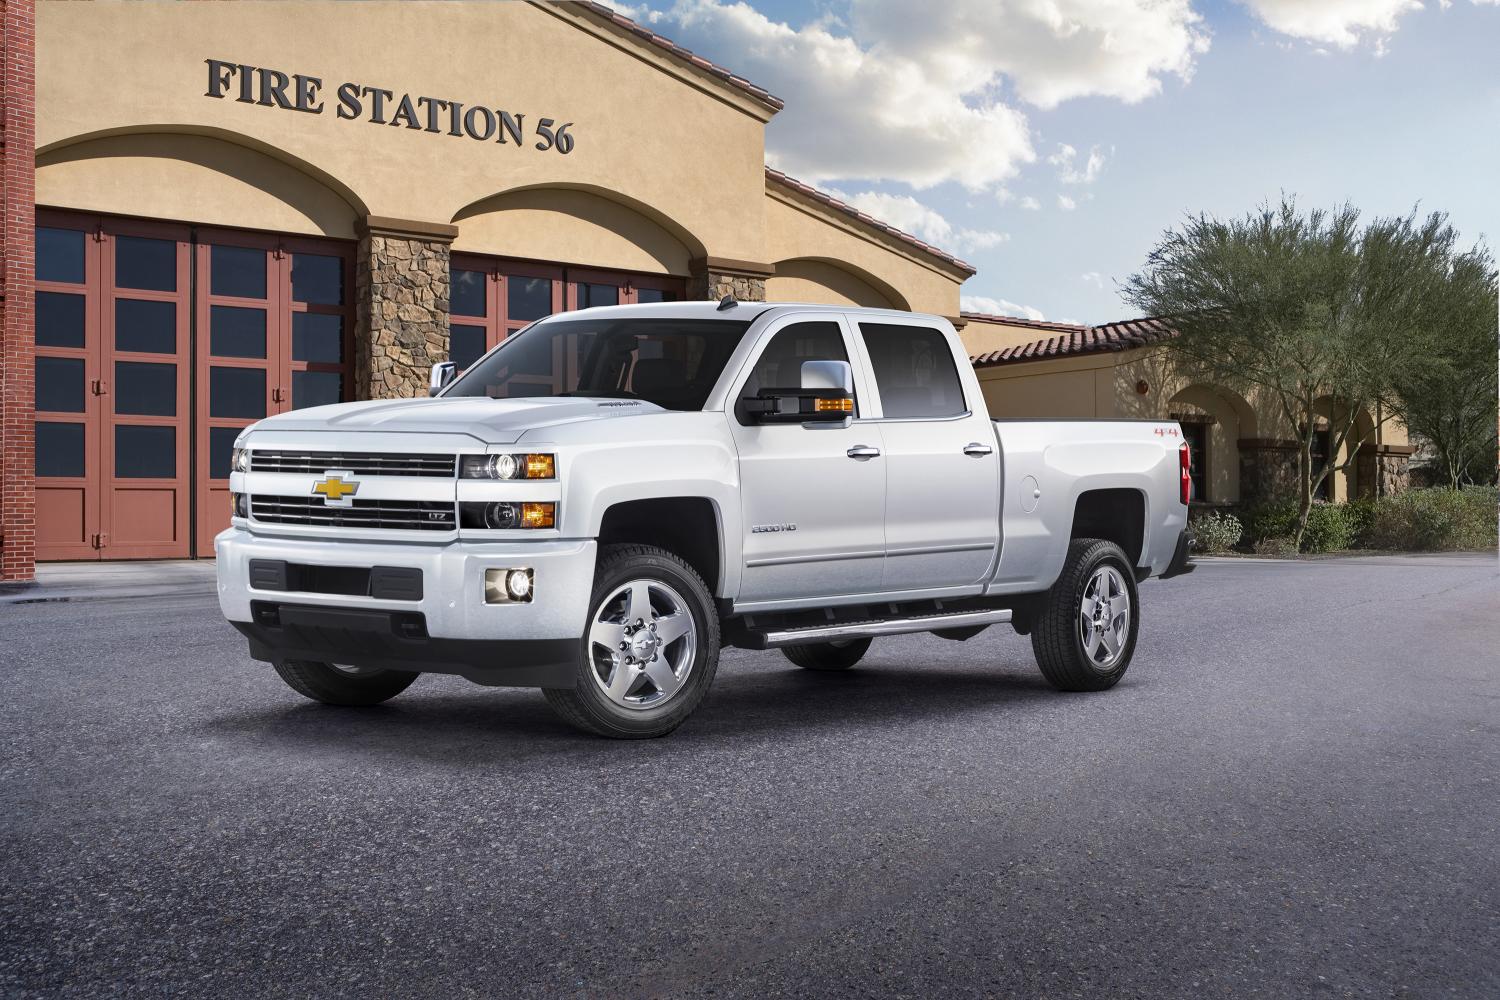 More information about "GM truck sales continue to surge as competitors lose ground"